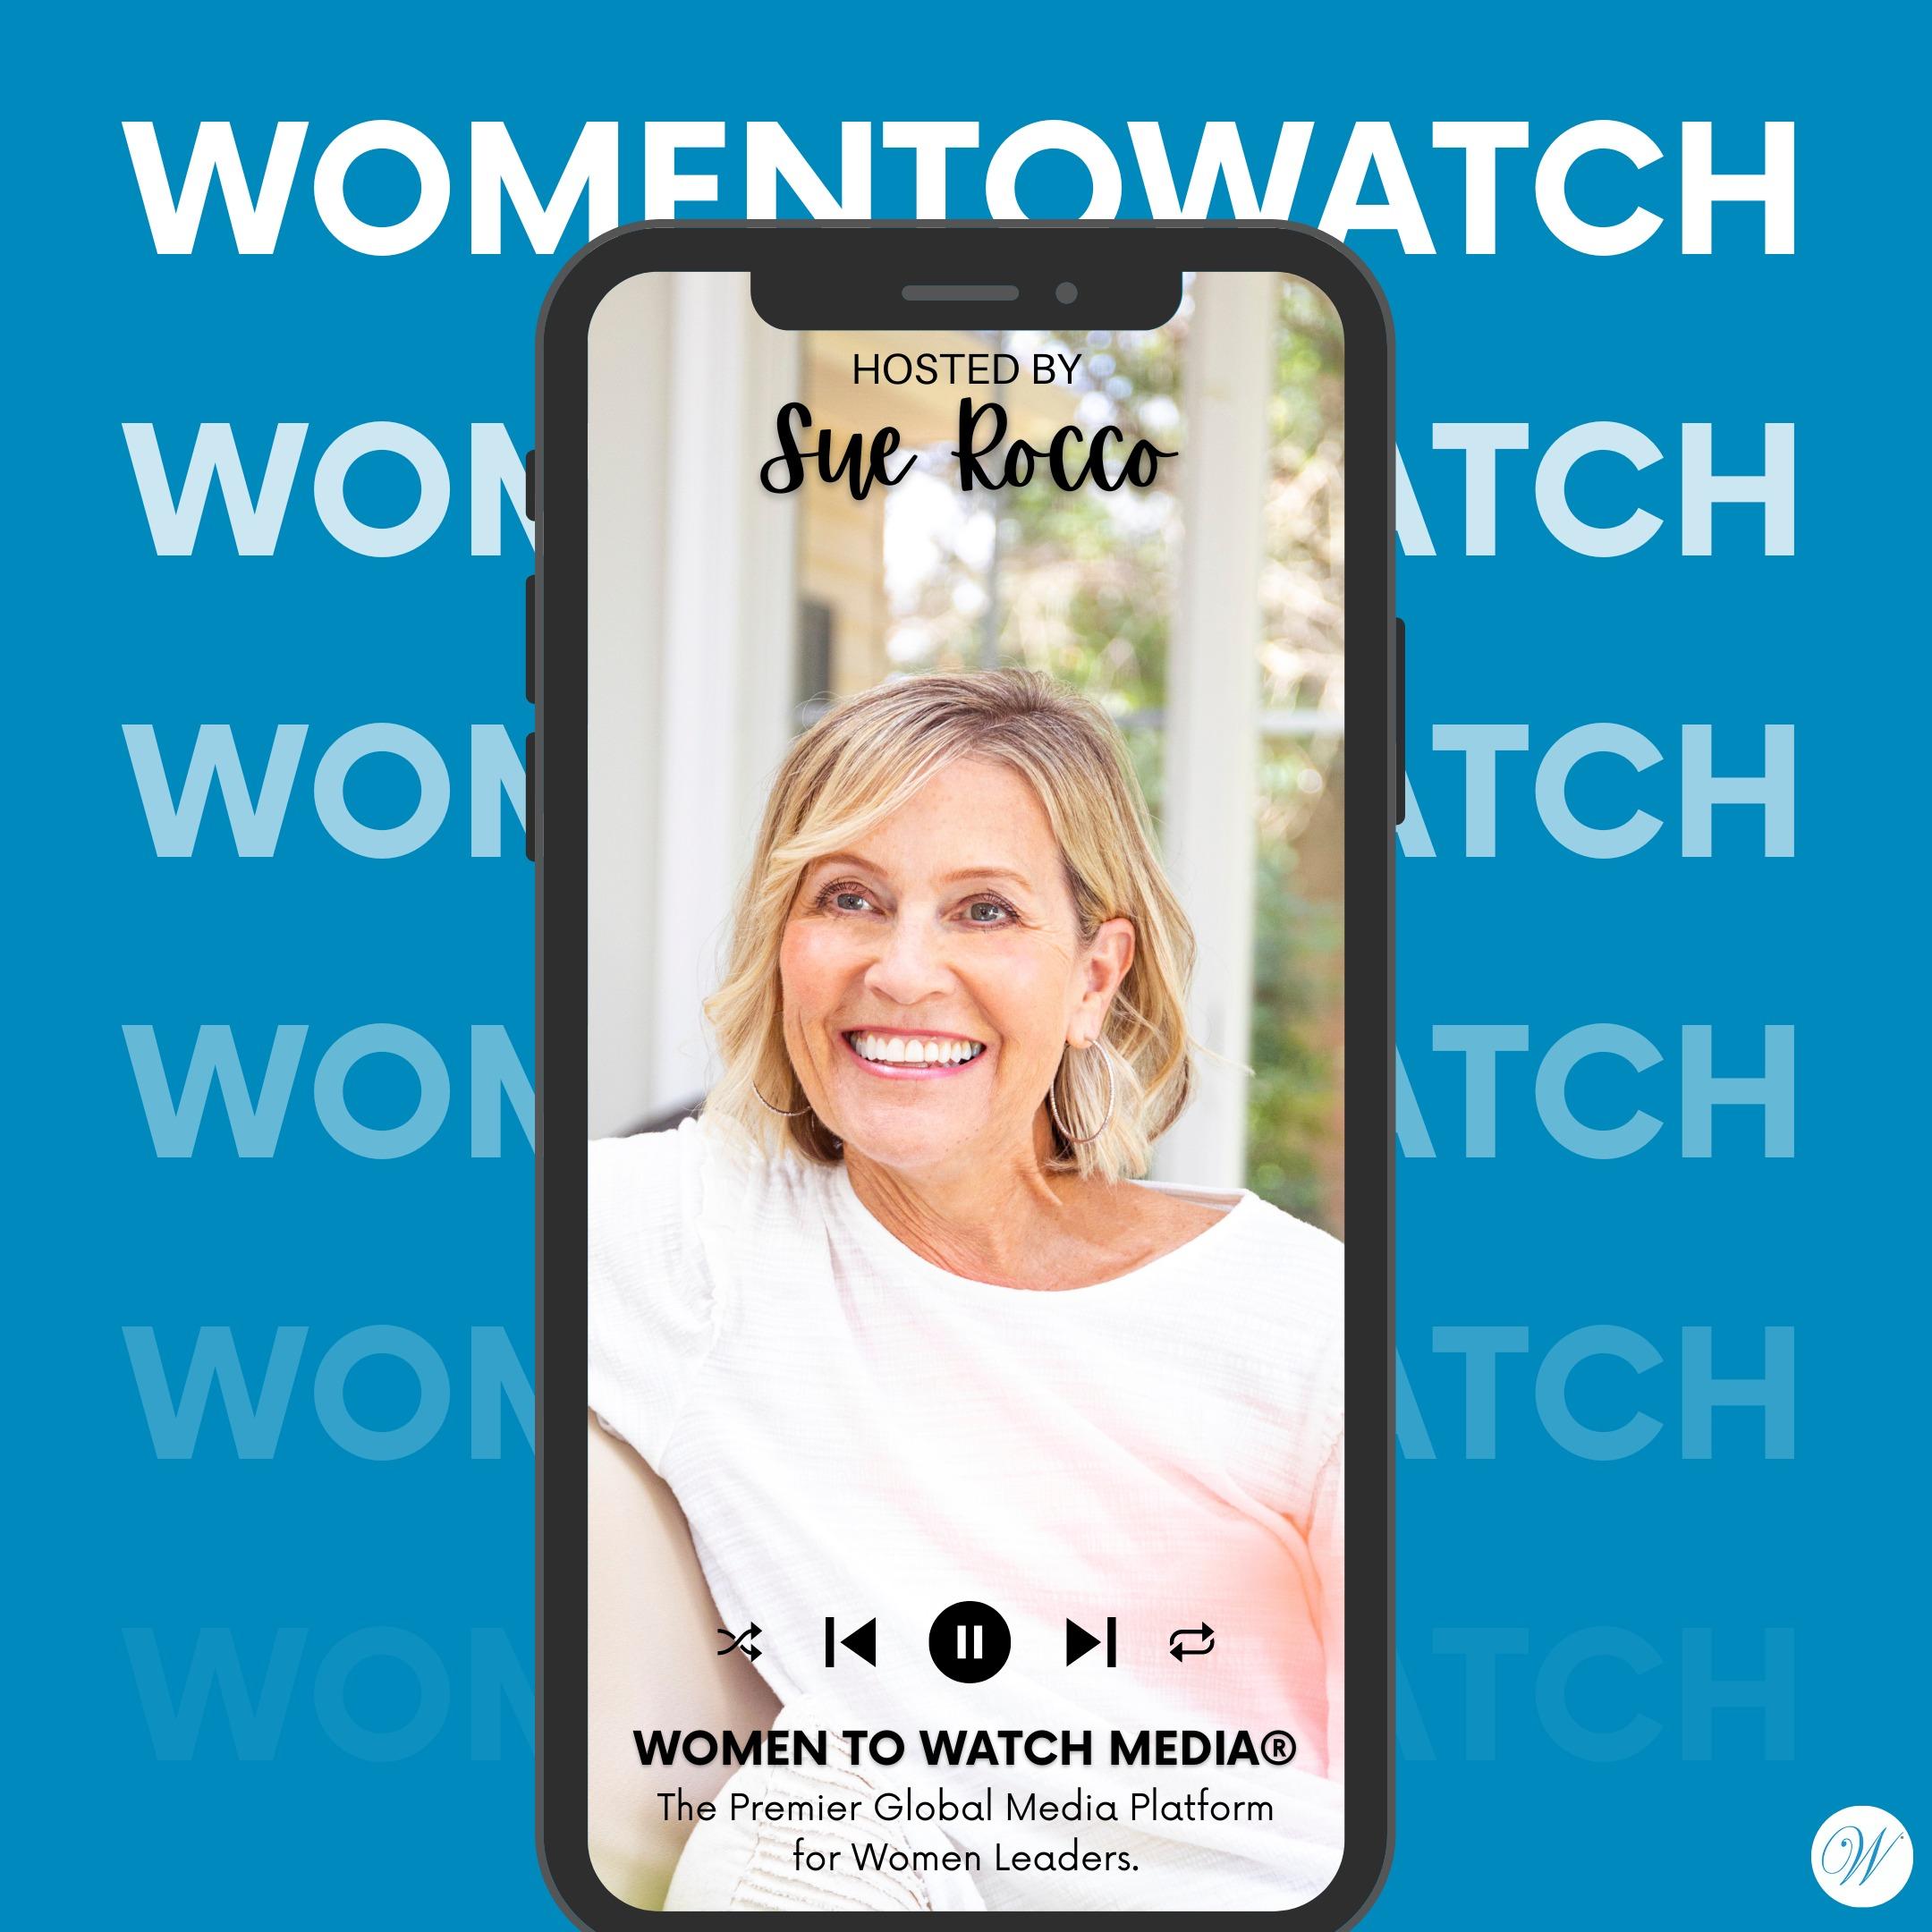 Women to Watch Media® with Sue Rocco